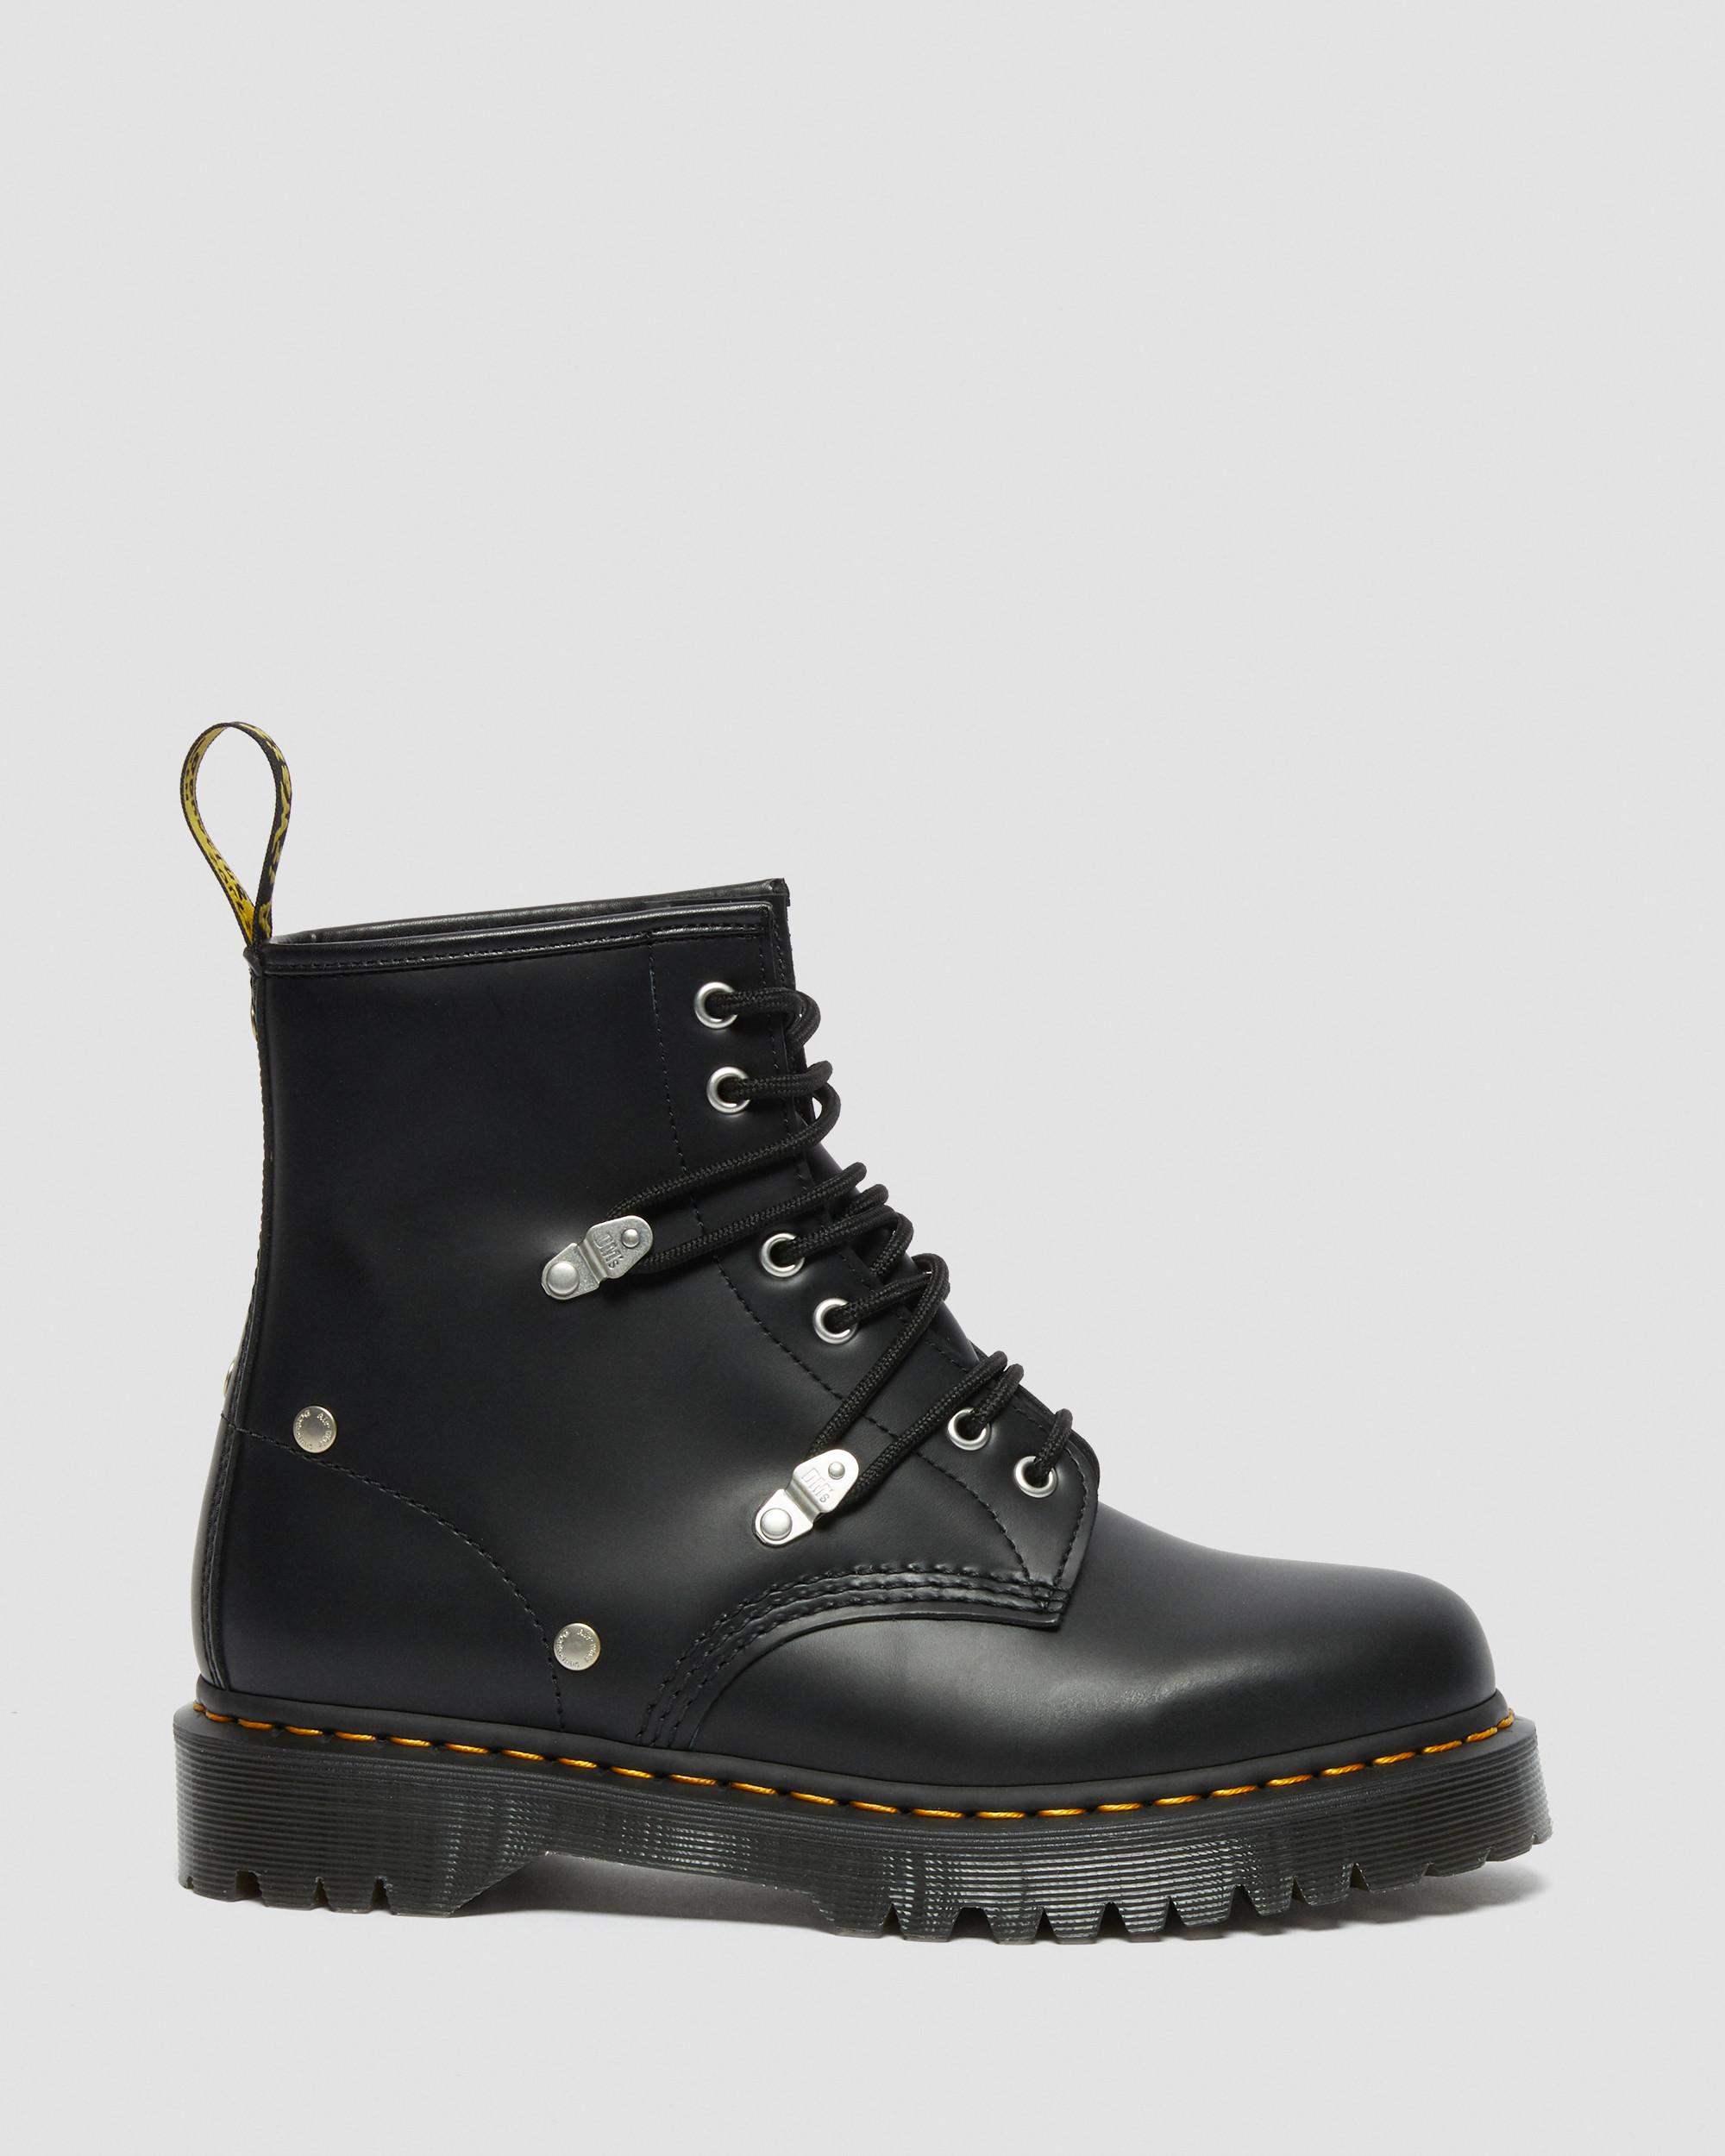 1460 Bex Stud Leather Boots in Black | Dr. Martens